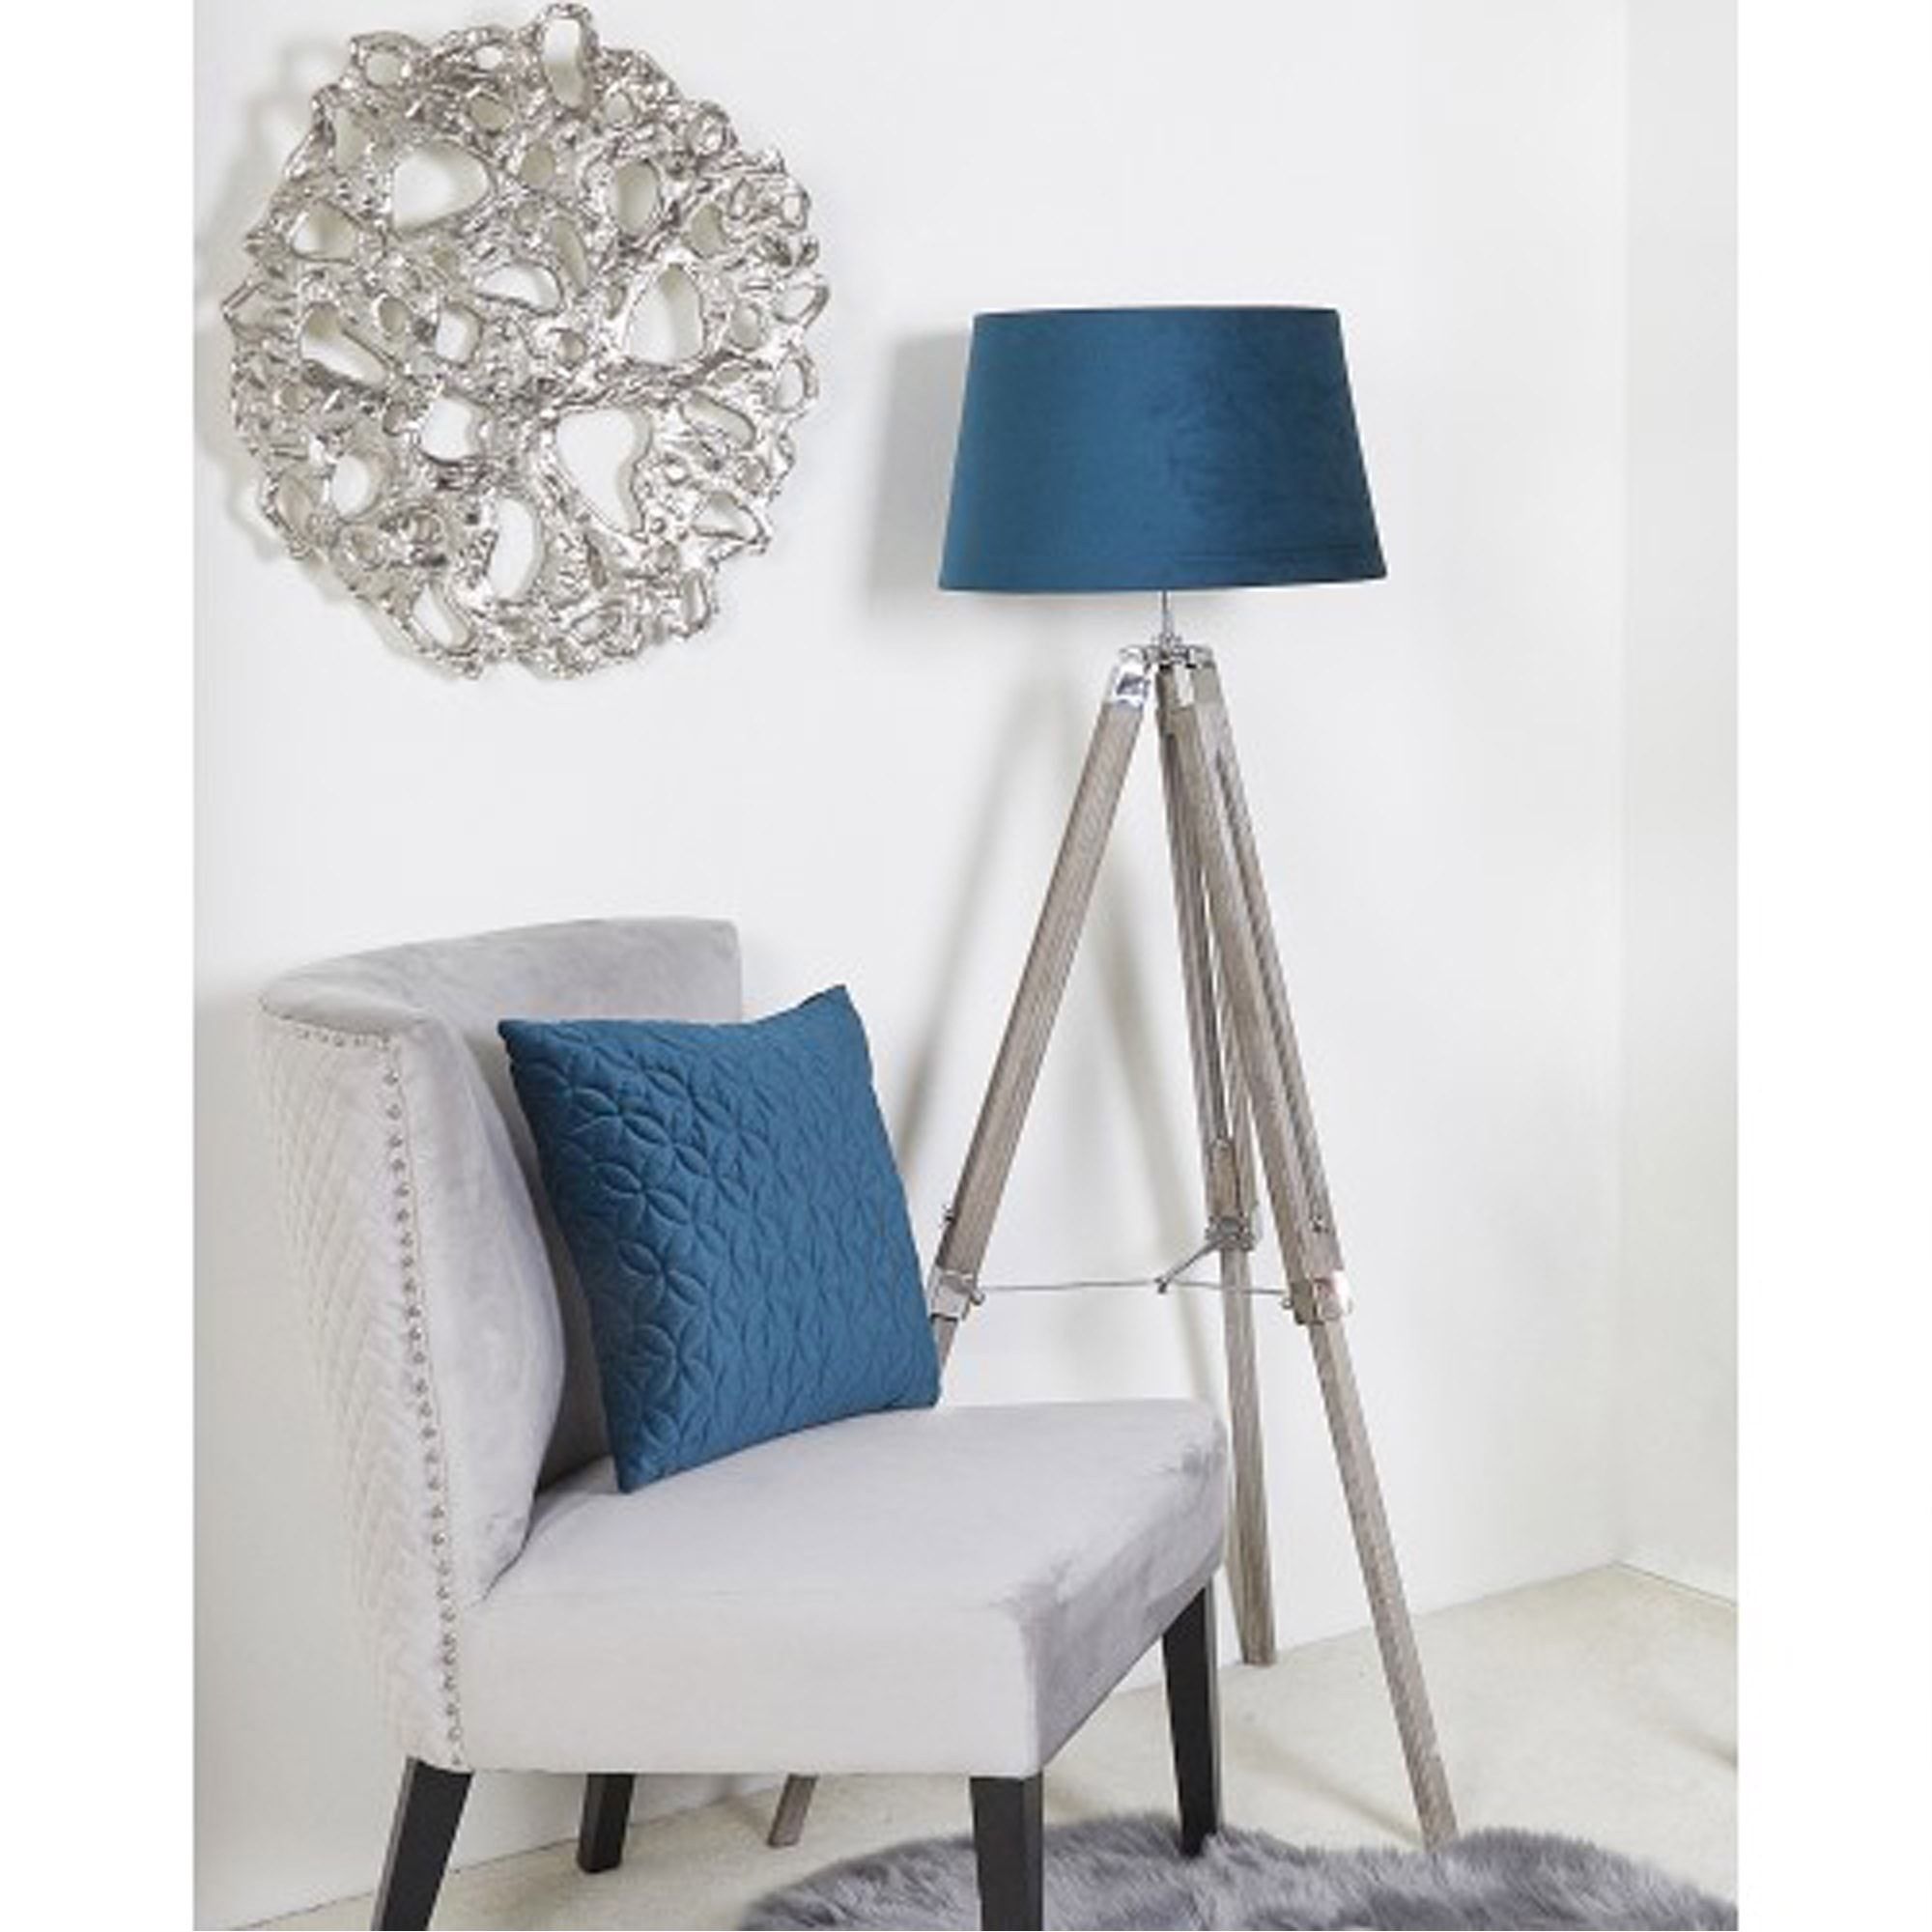 Wood Tripod Floor Lamp With Blue Shade | Floor Standing Lamps Inside Blue Floor Lamps (View 11 of 15)